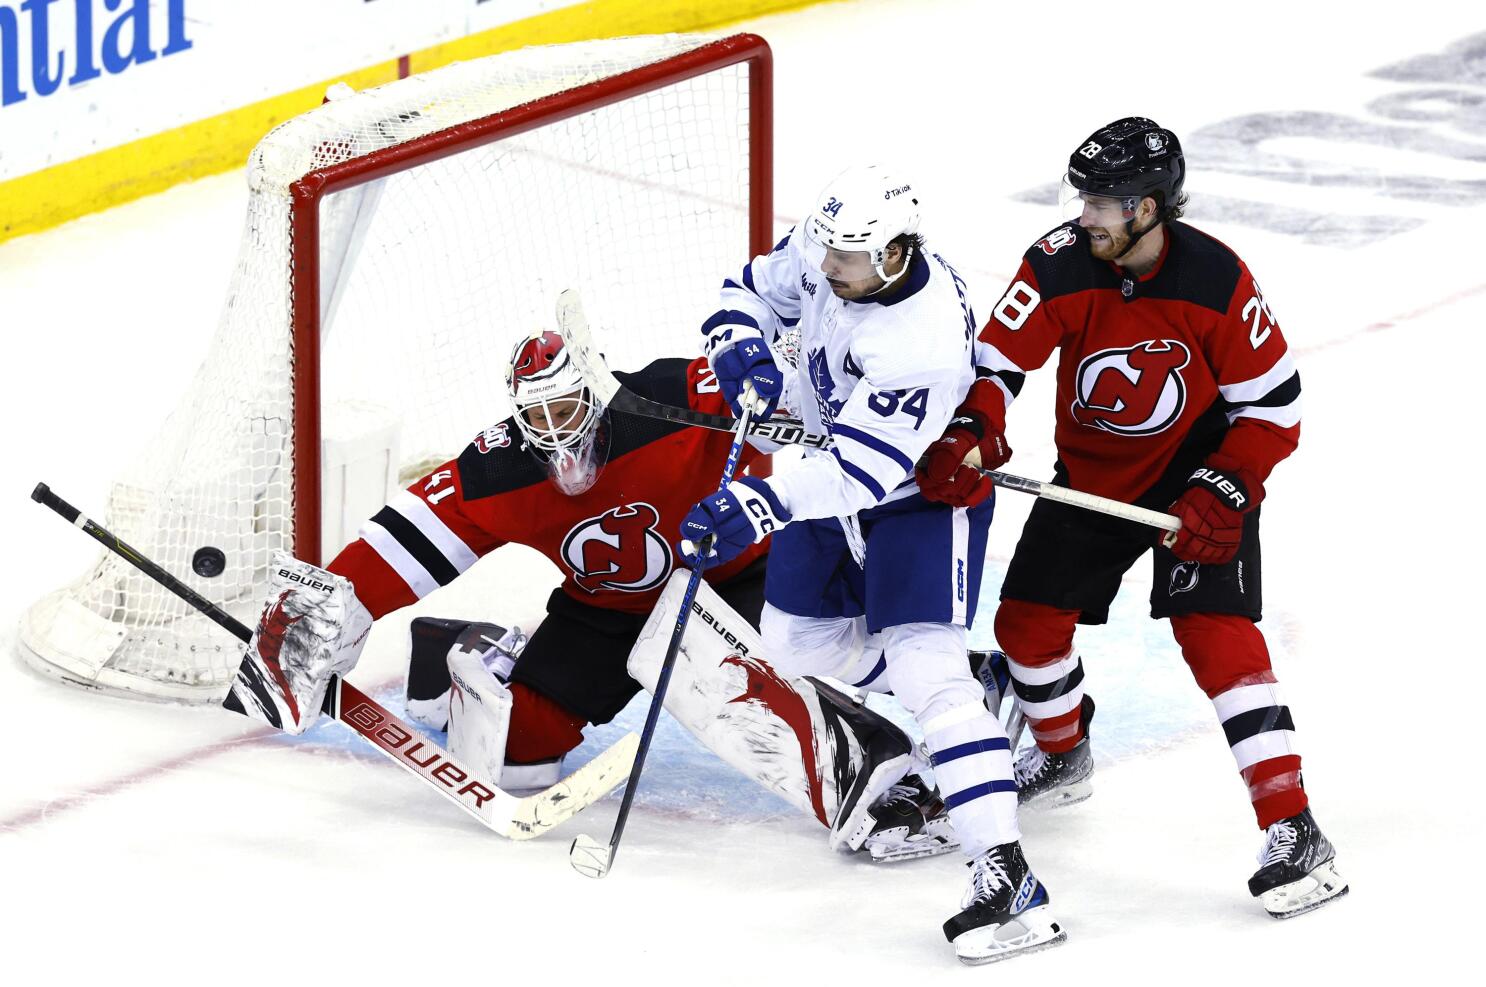 Devils' Palat Aims to Rebound After Rough Season